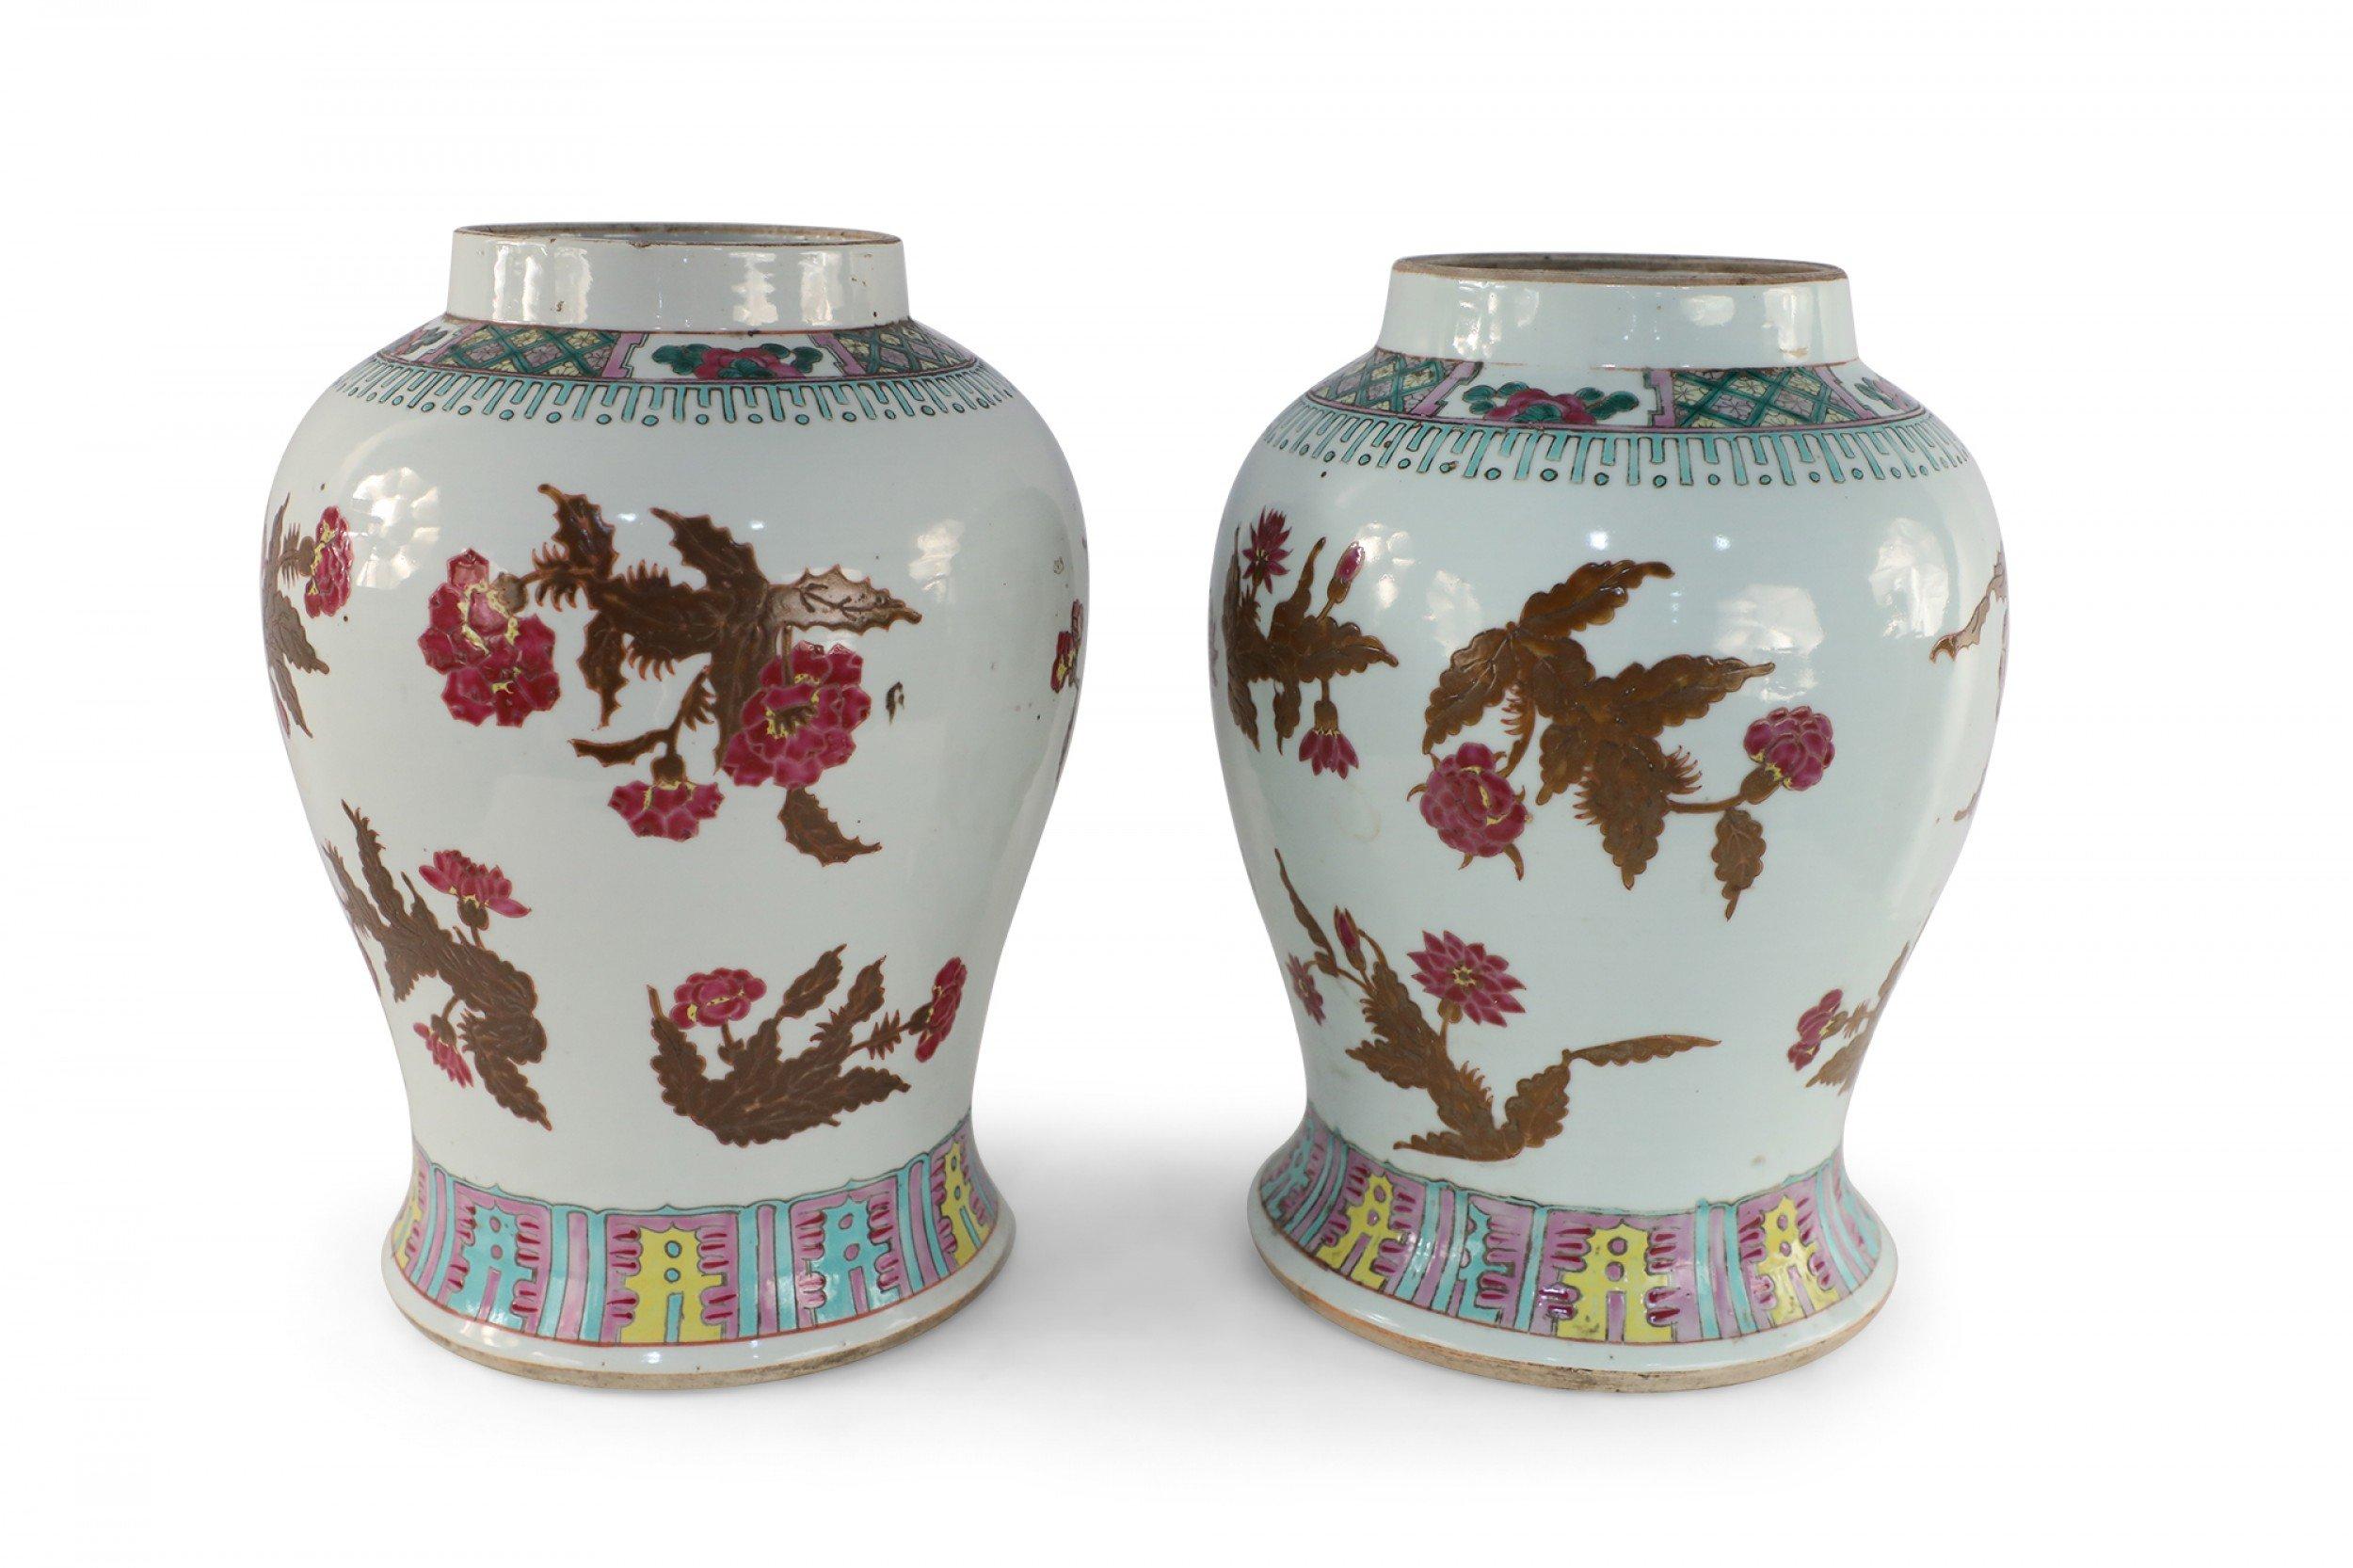 Pair of Chinese White and Umber Floral Design Porcelain Vases For Sale 2